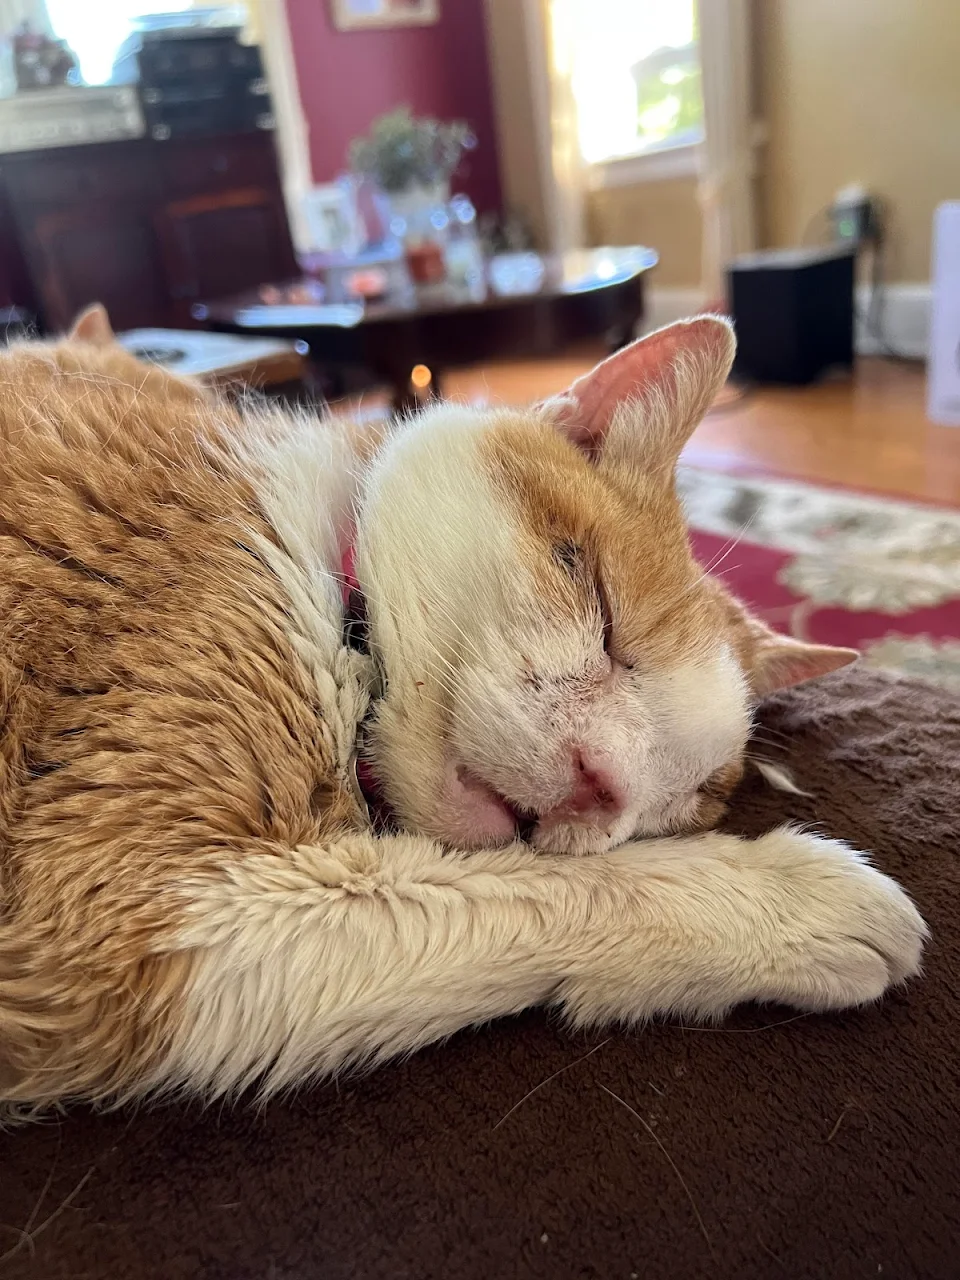 My 16 year old cat is getting a punch biopsy tomorrow on her face and I’m so so worried. Please send positive vibes or advice for aftercare if your cat has had this.